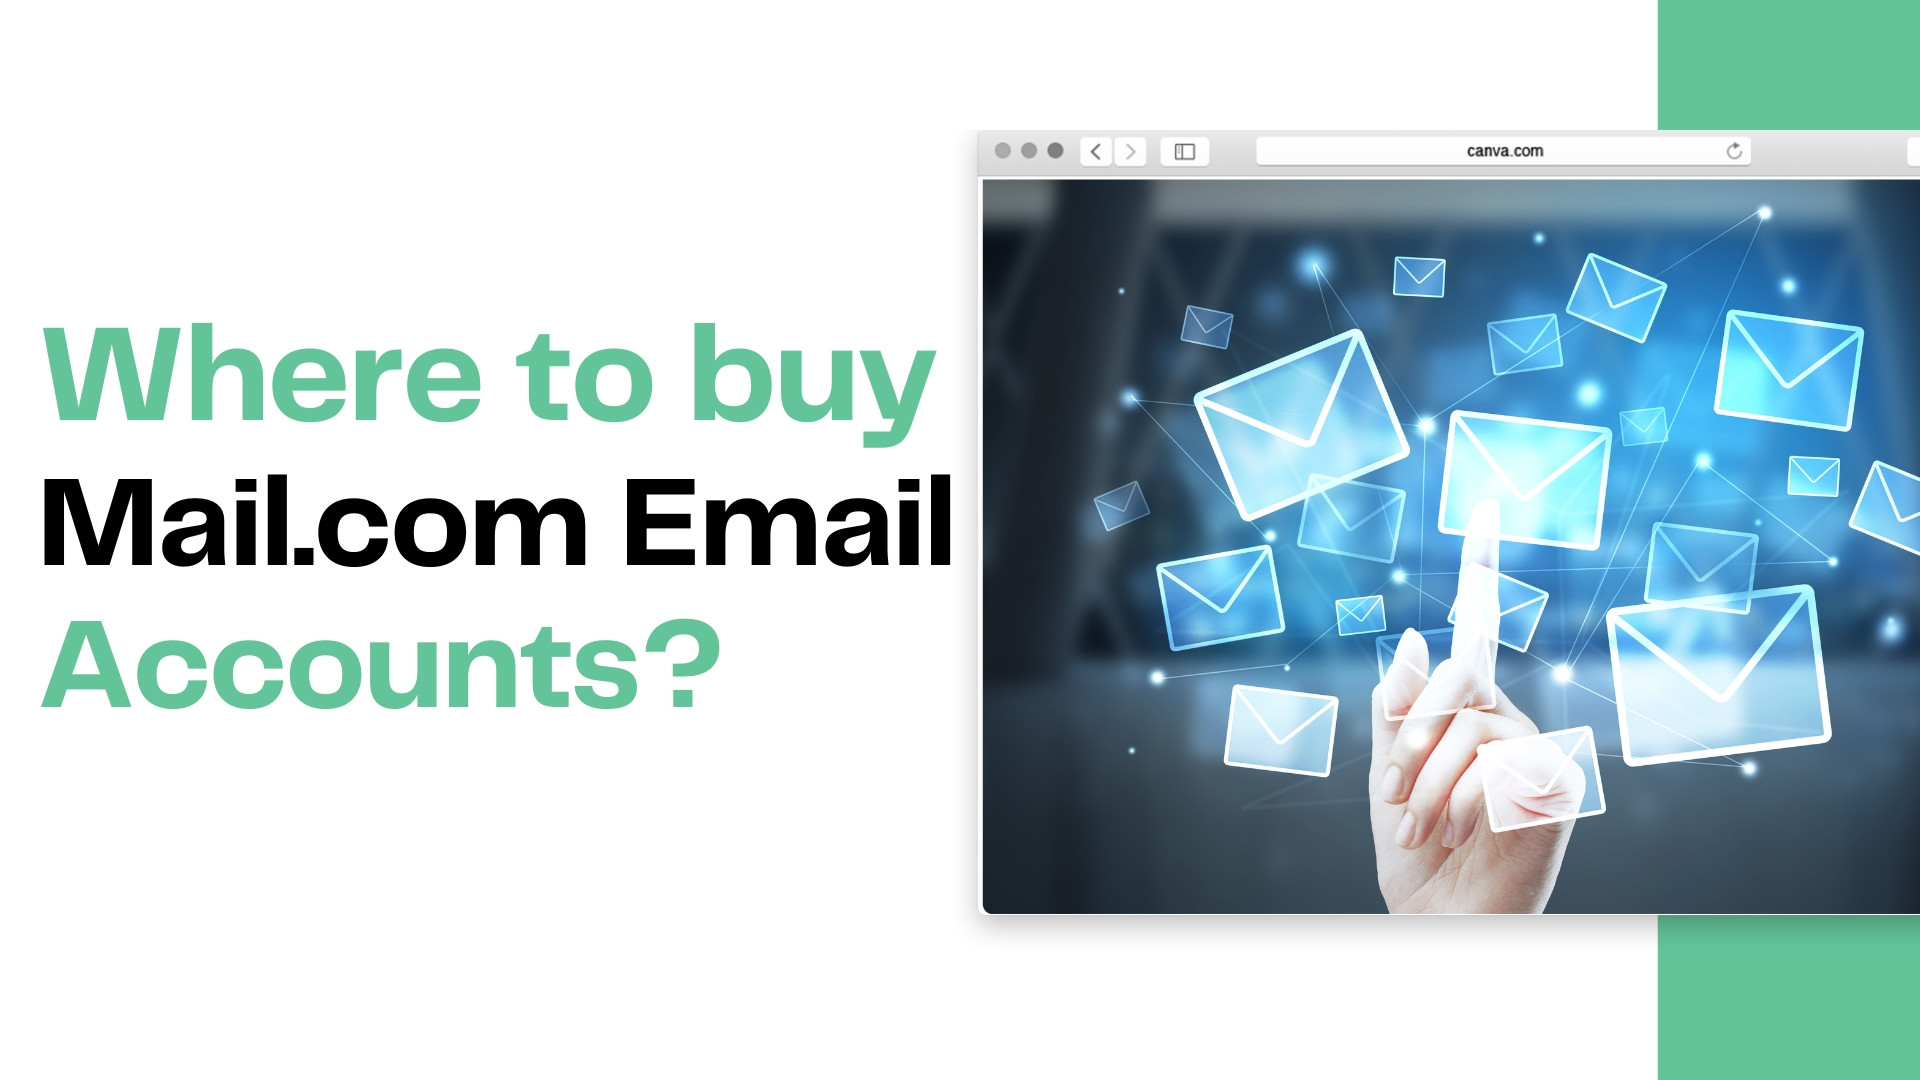 Where to buy Mail.com email accounts?